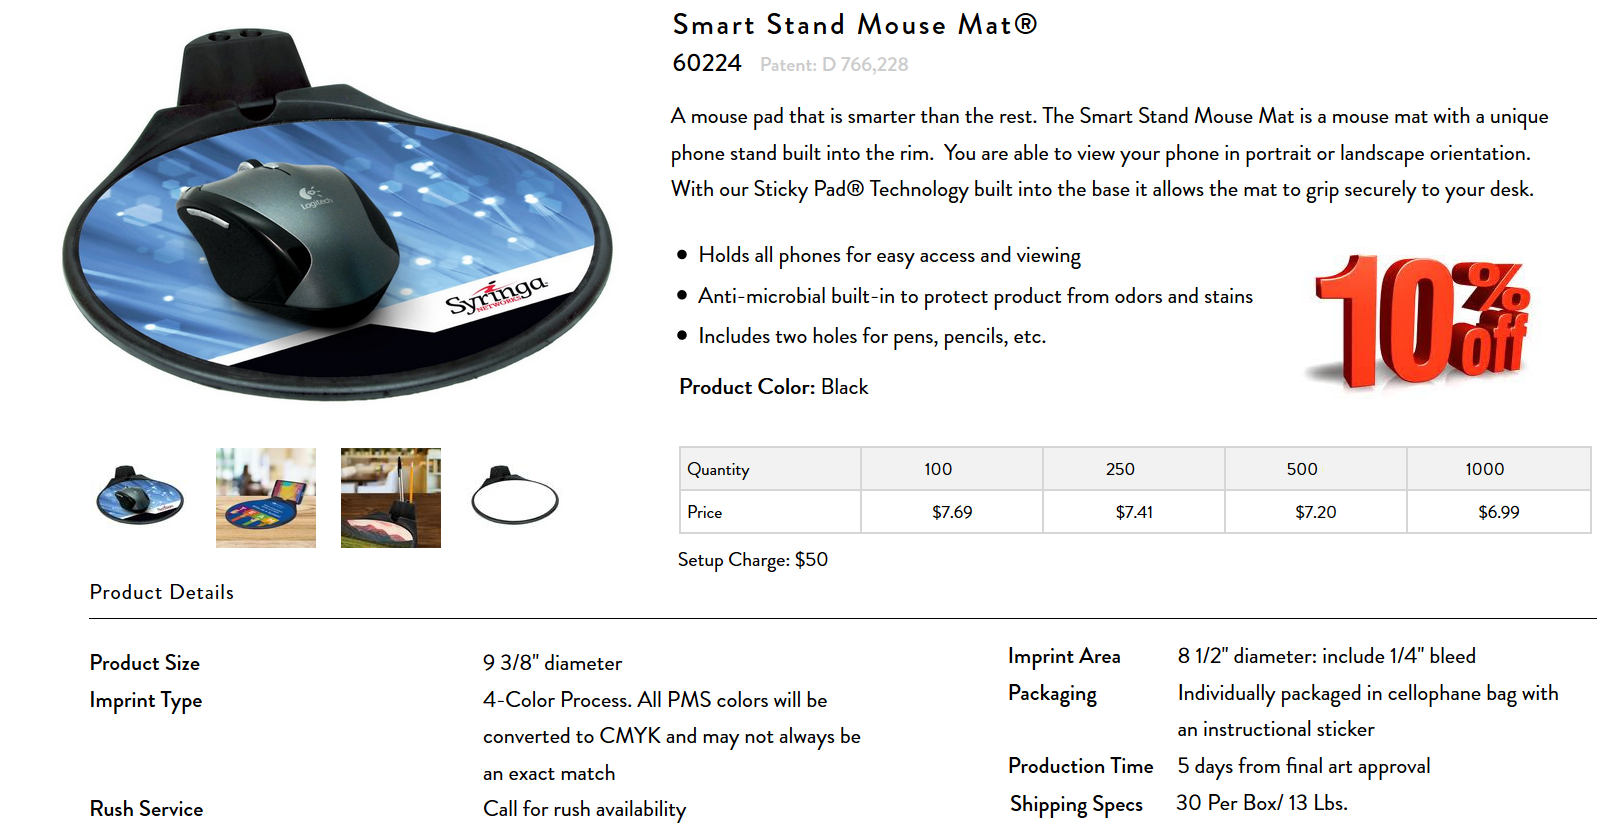 Smart Stand Mouse Mat